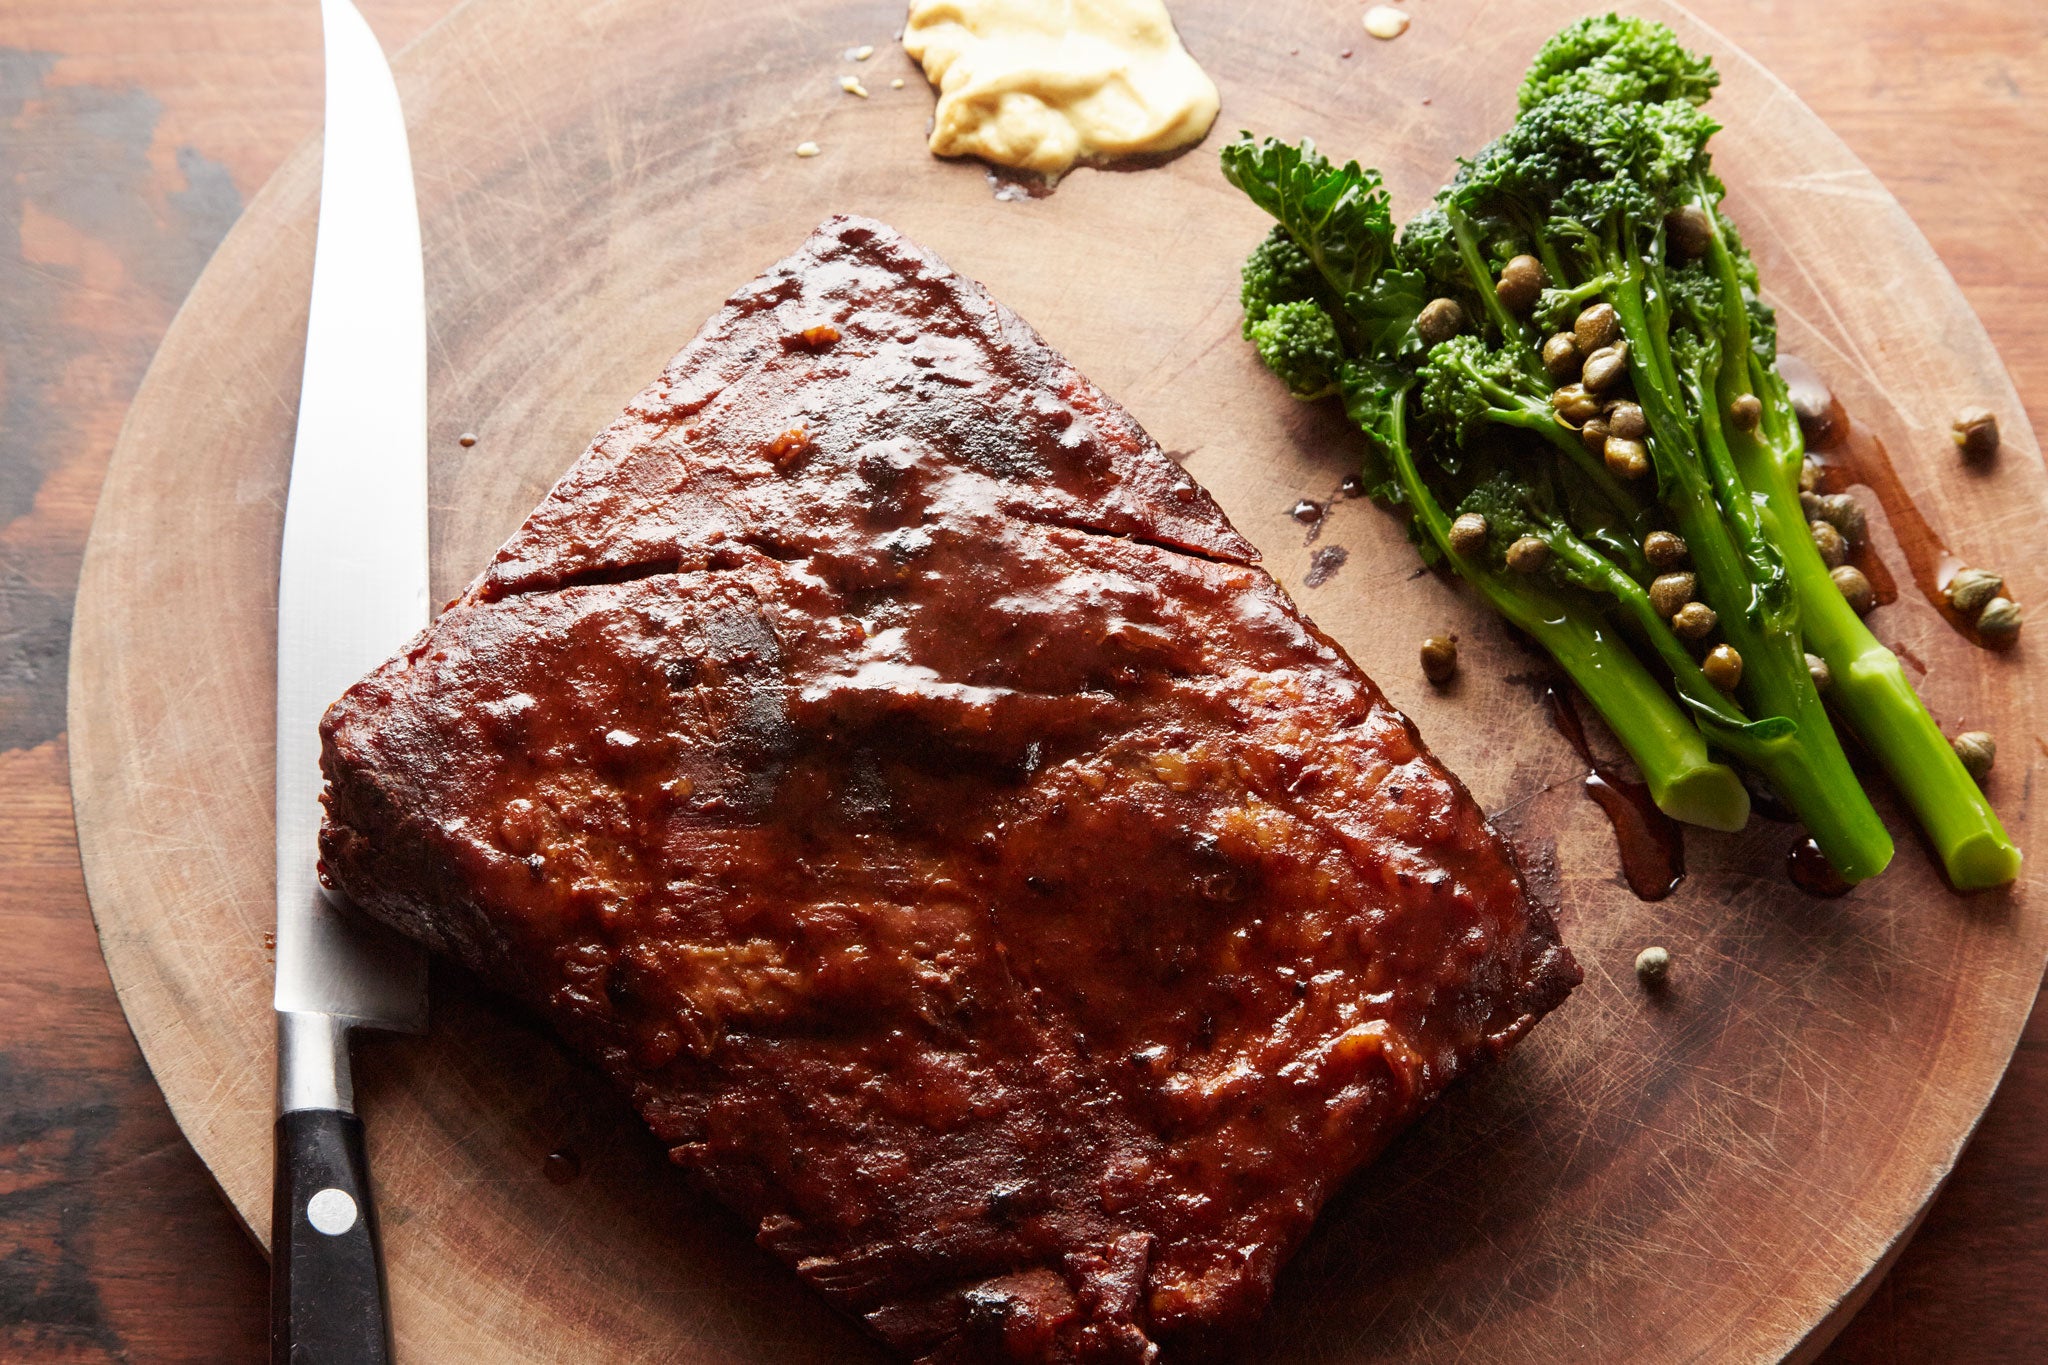 Cadwell's spiced, slow-cooked beef brisket